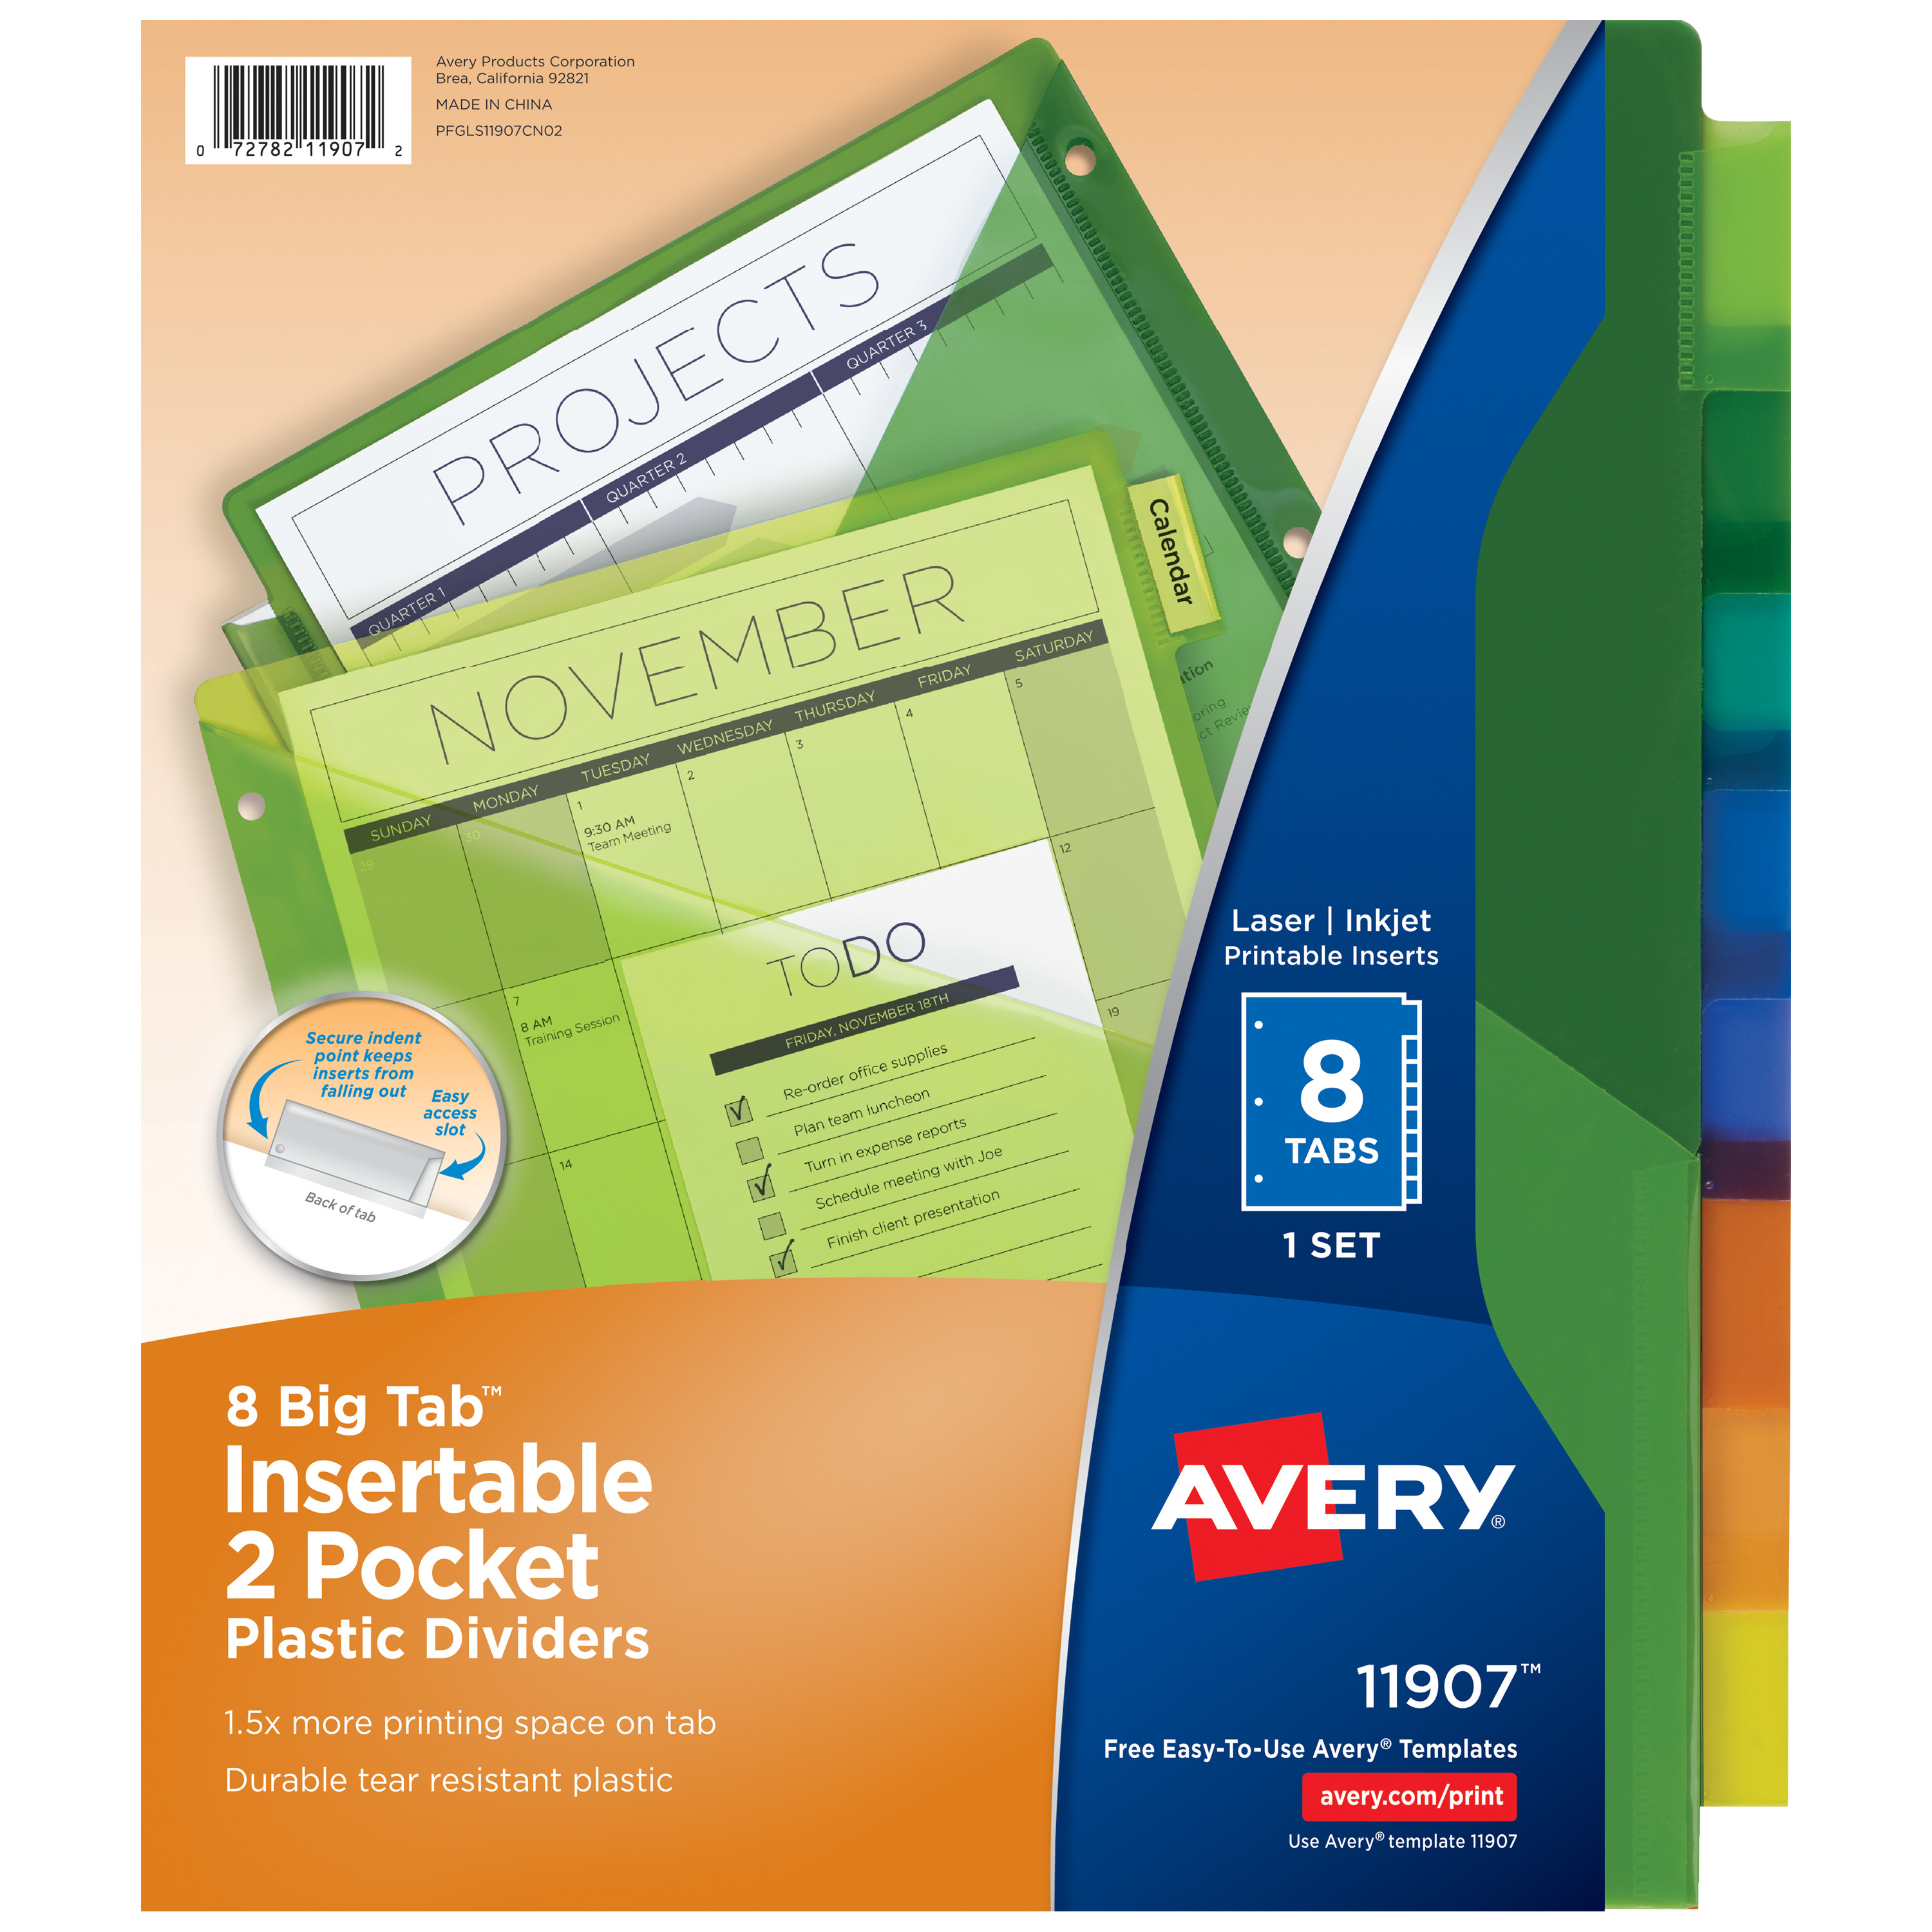 Avery Big Tab Insertable 2 Pocket Dividers, 8 Tabs (11907) - image 1 of 9